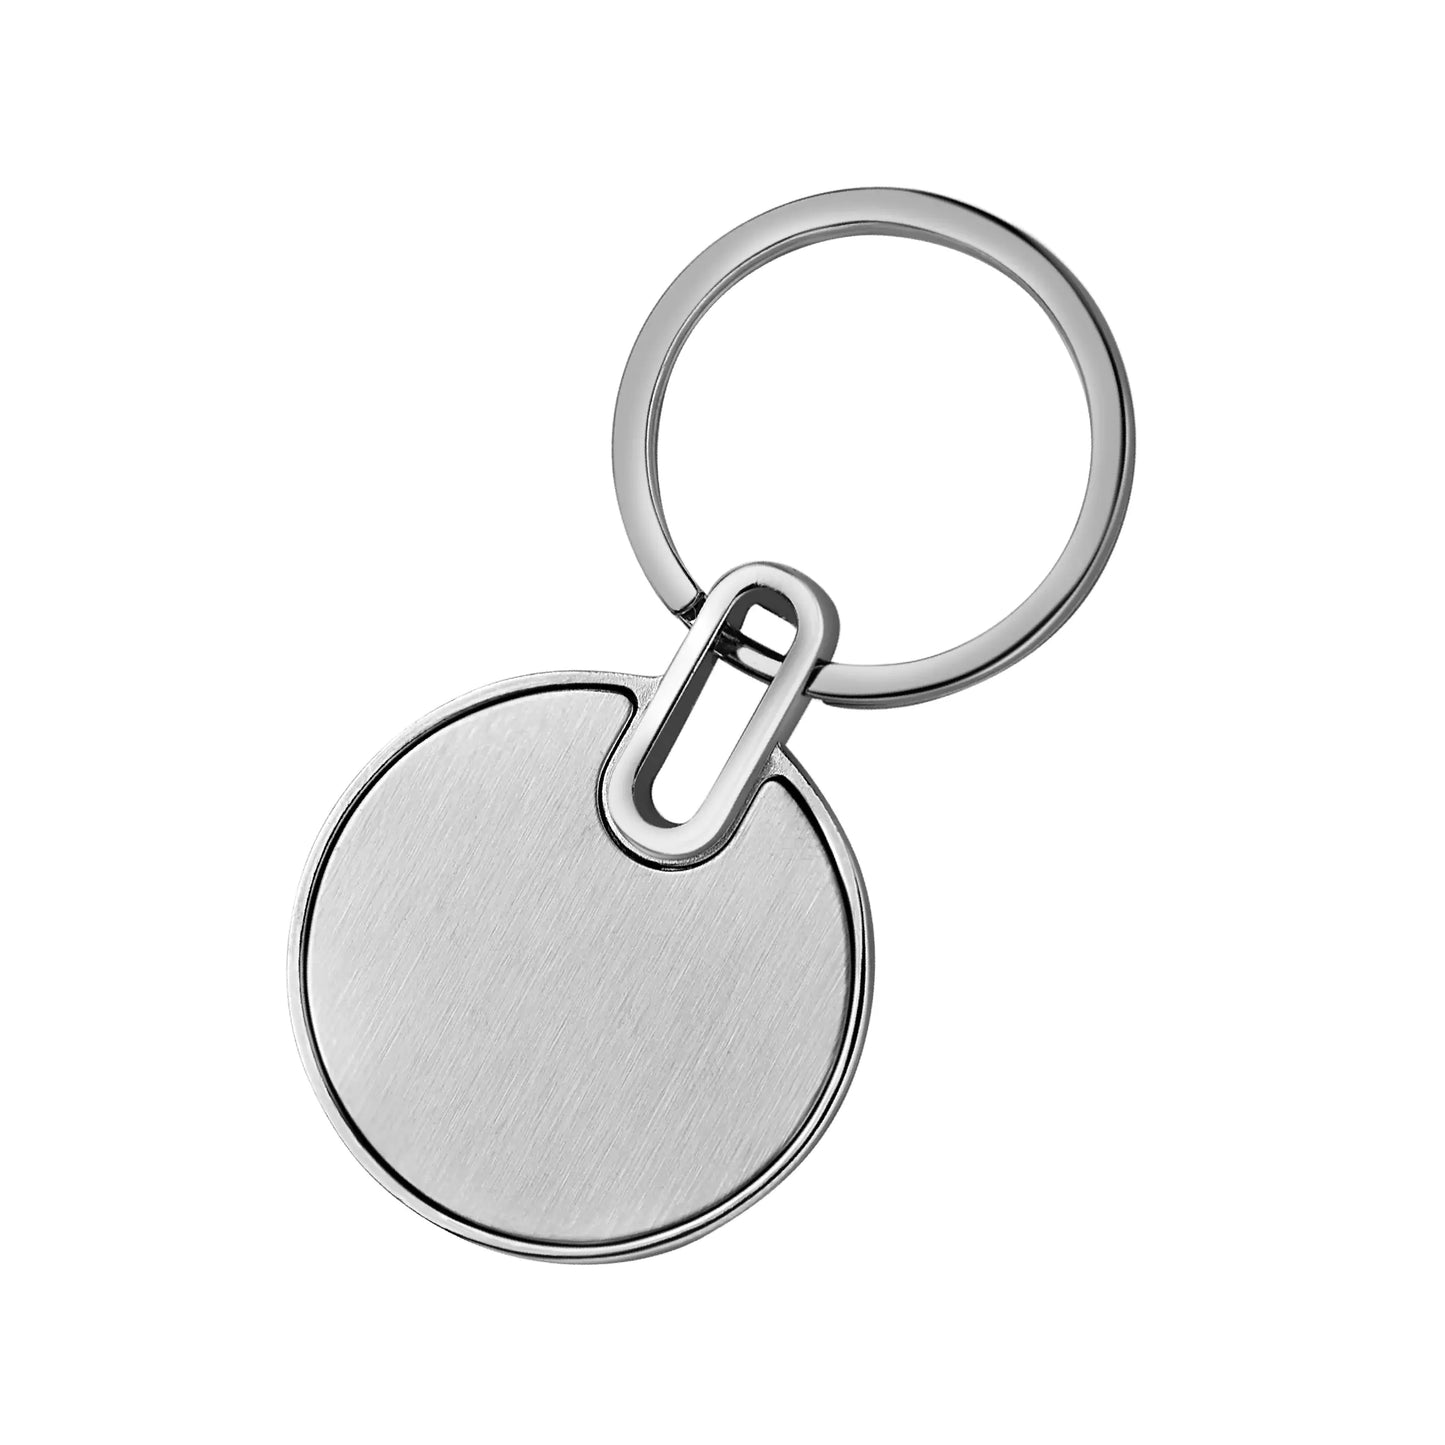 Round Steel Finish Metal Keychain - For Employee, Client, Dealer, or Corporate Gifting, Events Promotional Freebie JKC4